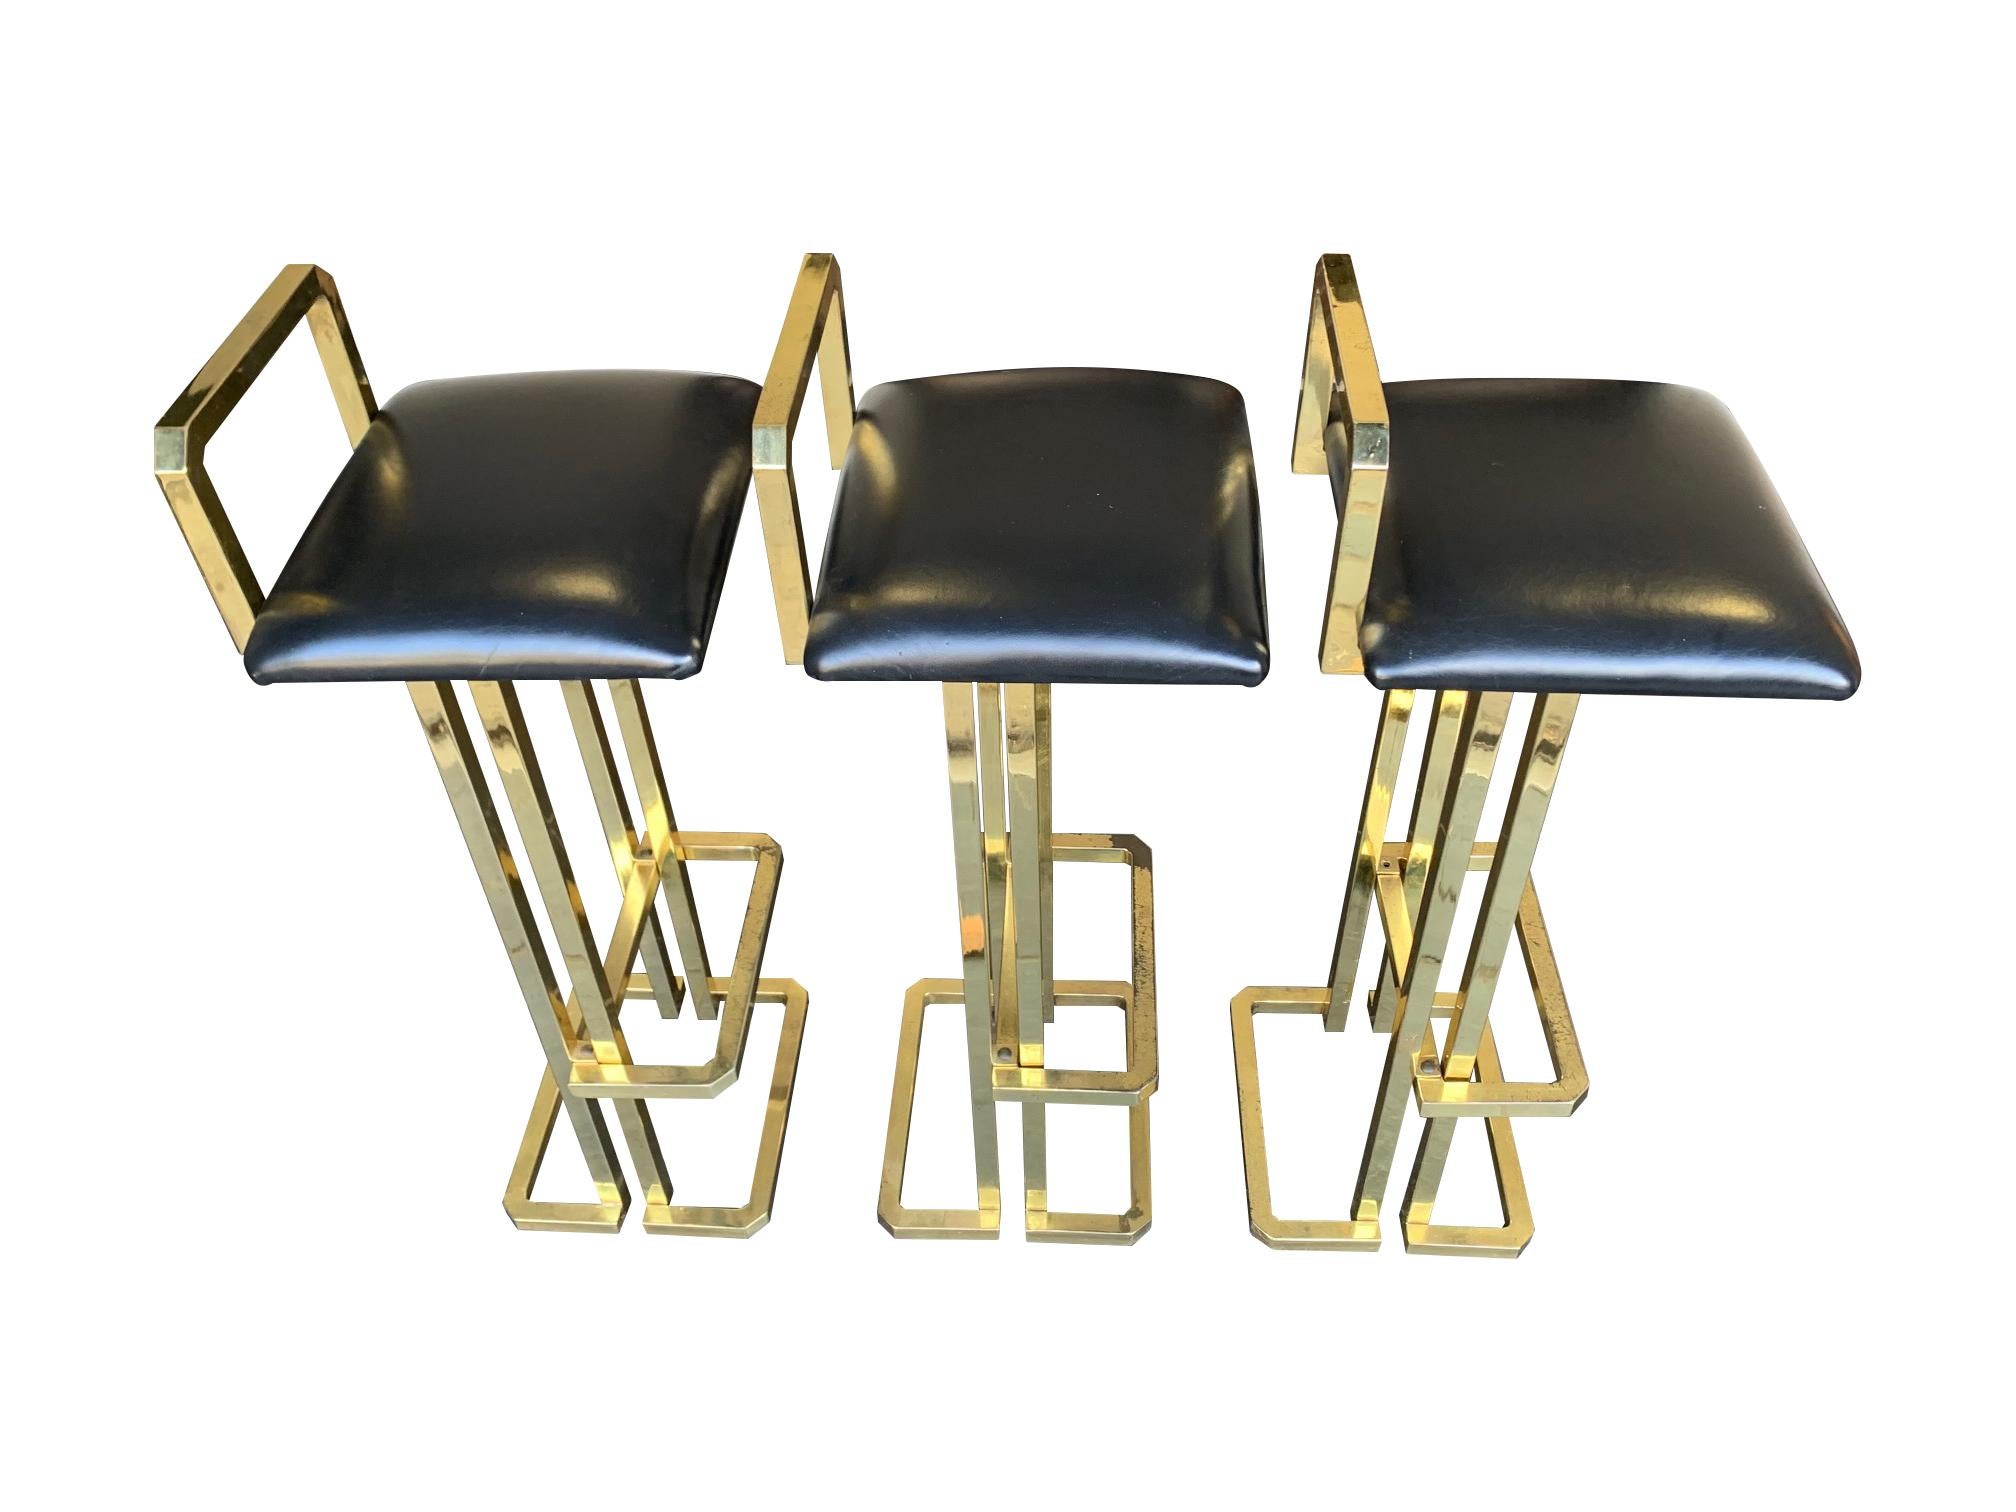 Set of 3 Maison Jansen Style Gilt Metal Stools with Black Leather Seat Pads For Sale 11